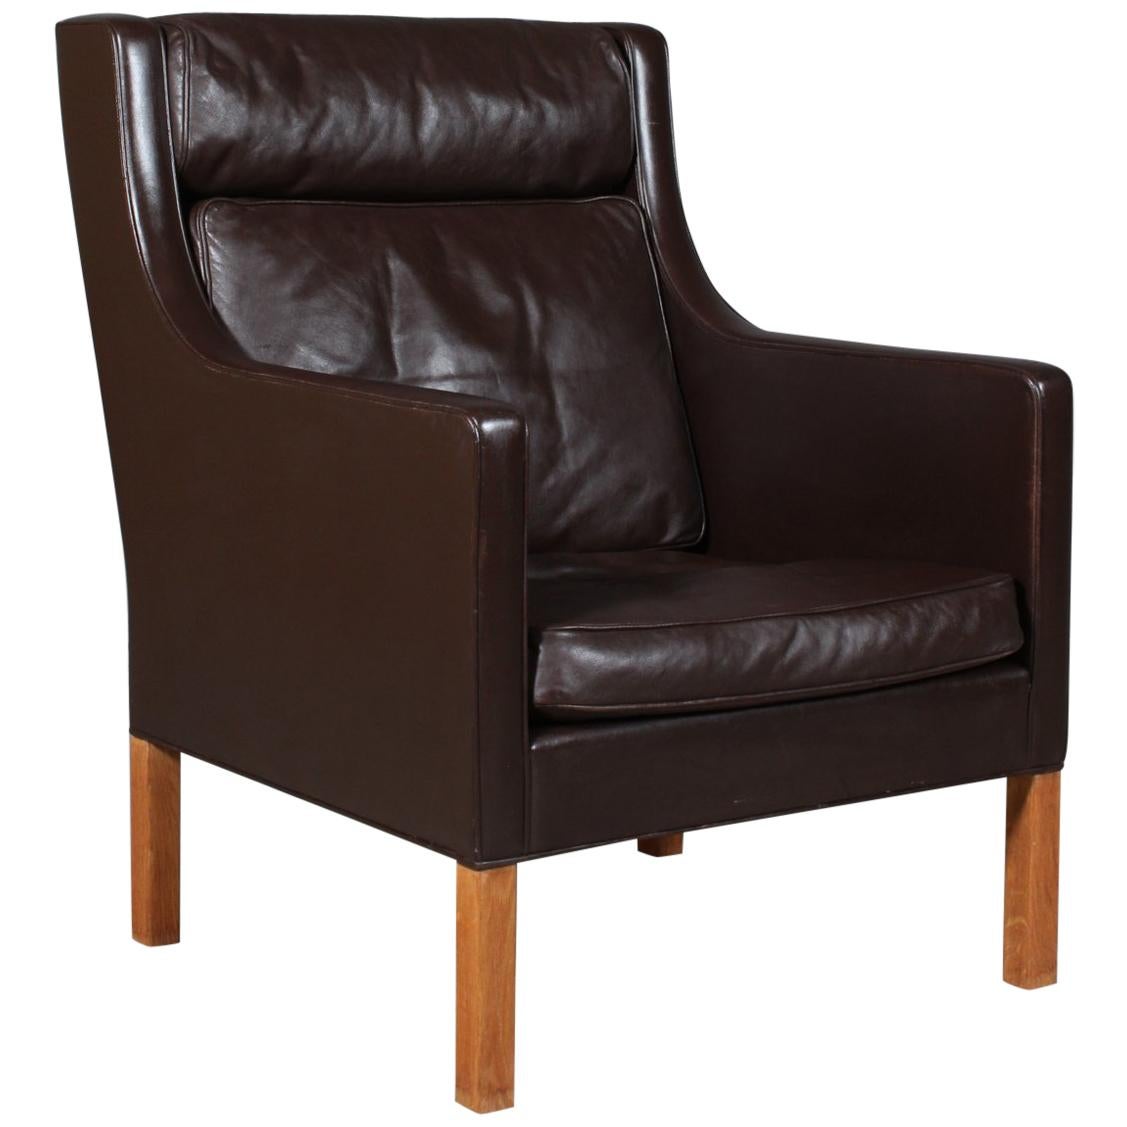 Børge & Peter Mogensen Lounge Chair in Brown Leather, Model 2431